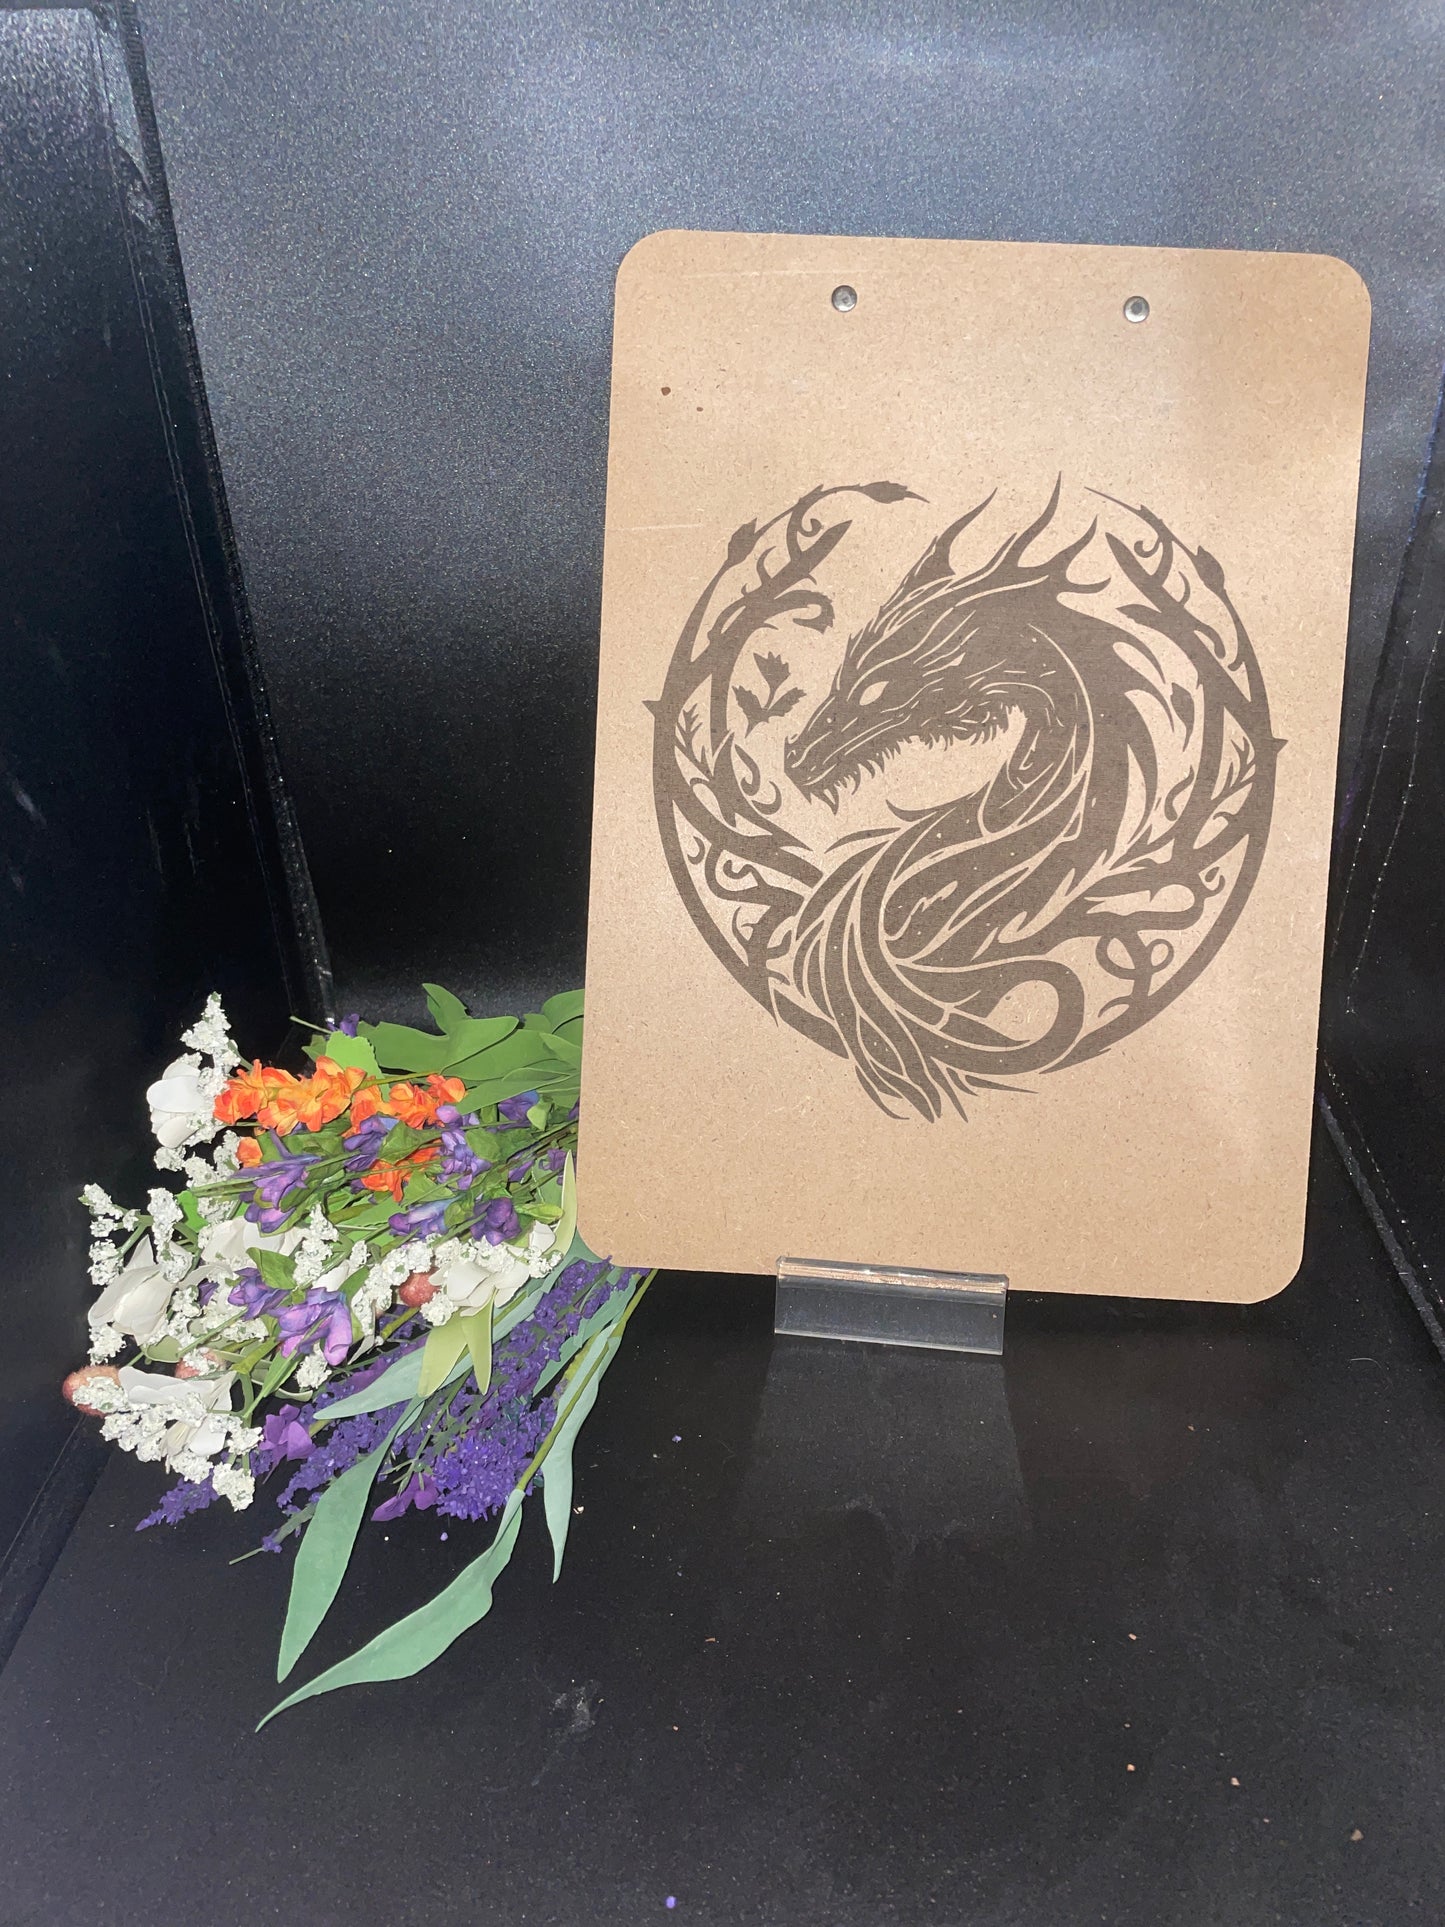 Dragon Clip Board - Clip board, clipboard, nerdy clipboard, gift for nerd, dungeons and dragons, d&d, tabletop, gamer, school, work, dungeon master, dungeon crawl